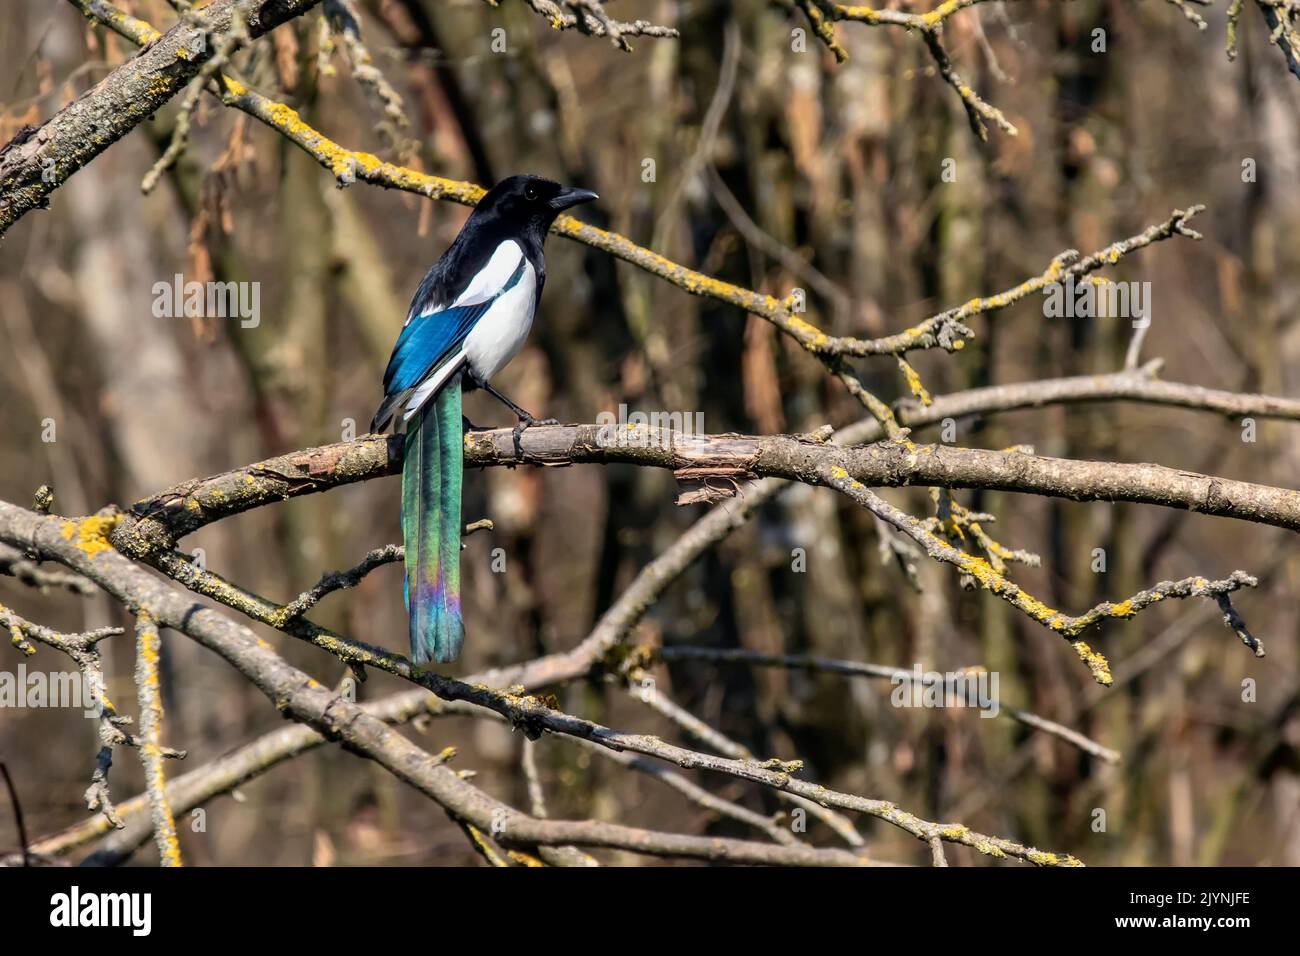 Black-billed Magpie (Pica pica) in a tree with iridescence of the tail plumage in winter, Glade on the edge of a forest, near Toul, Lorraine, France Stock Photo